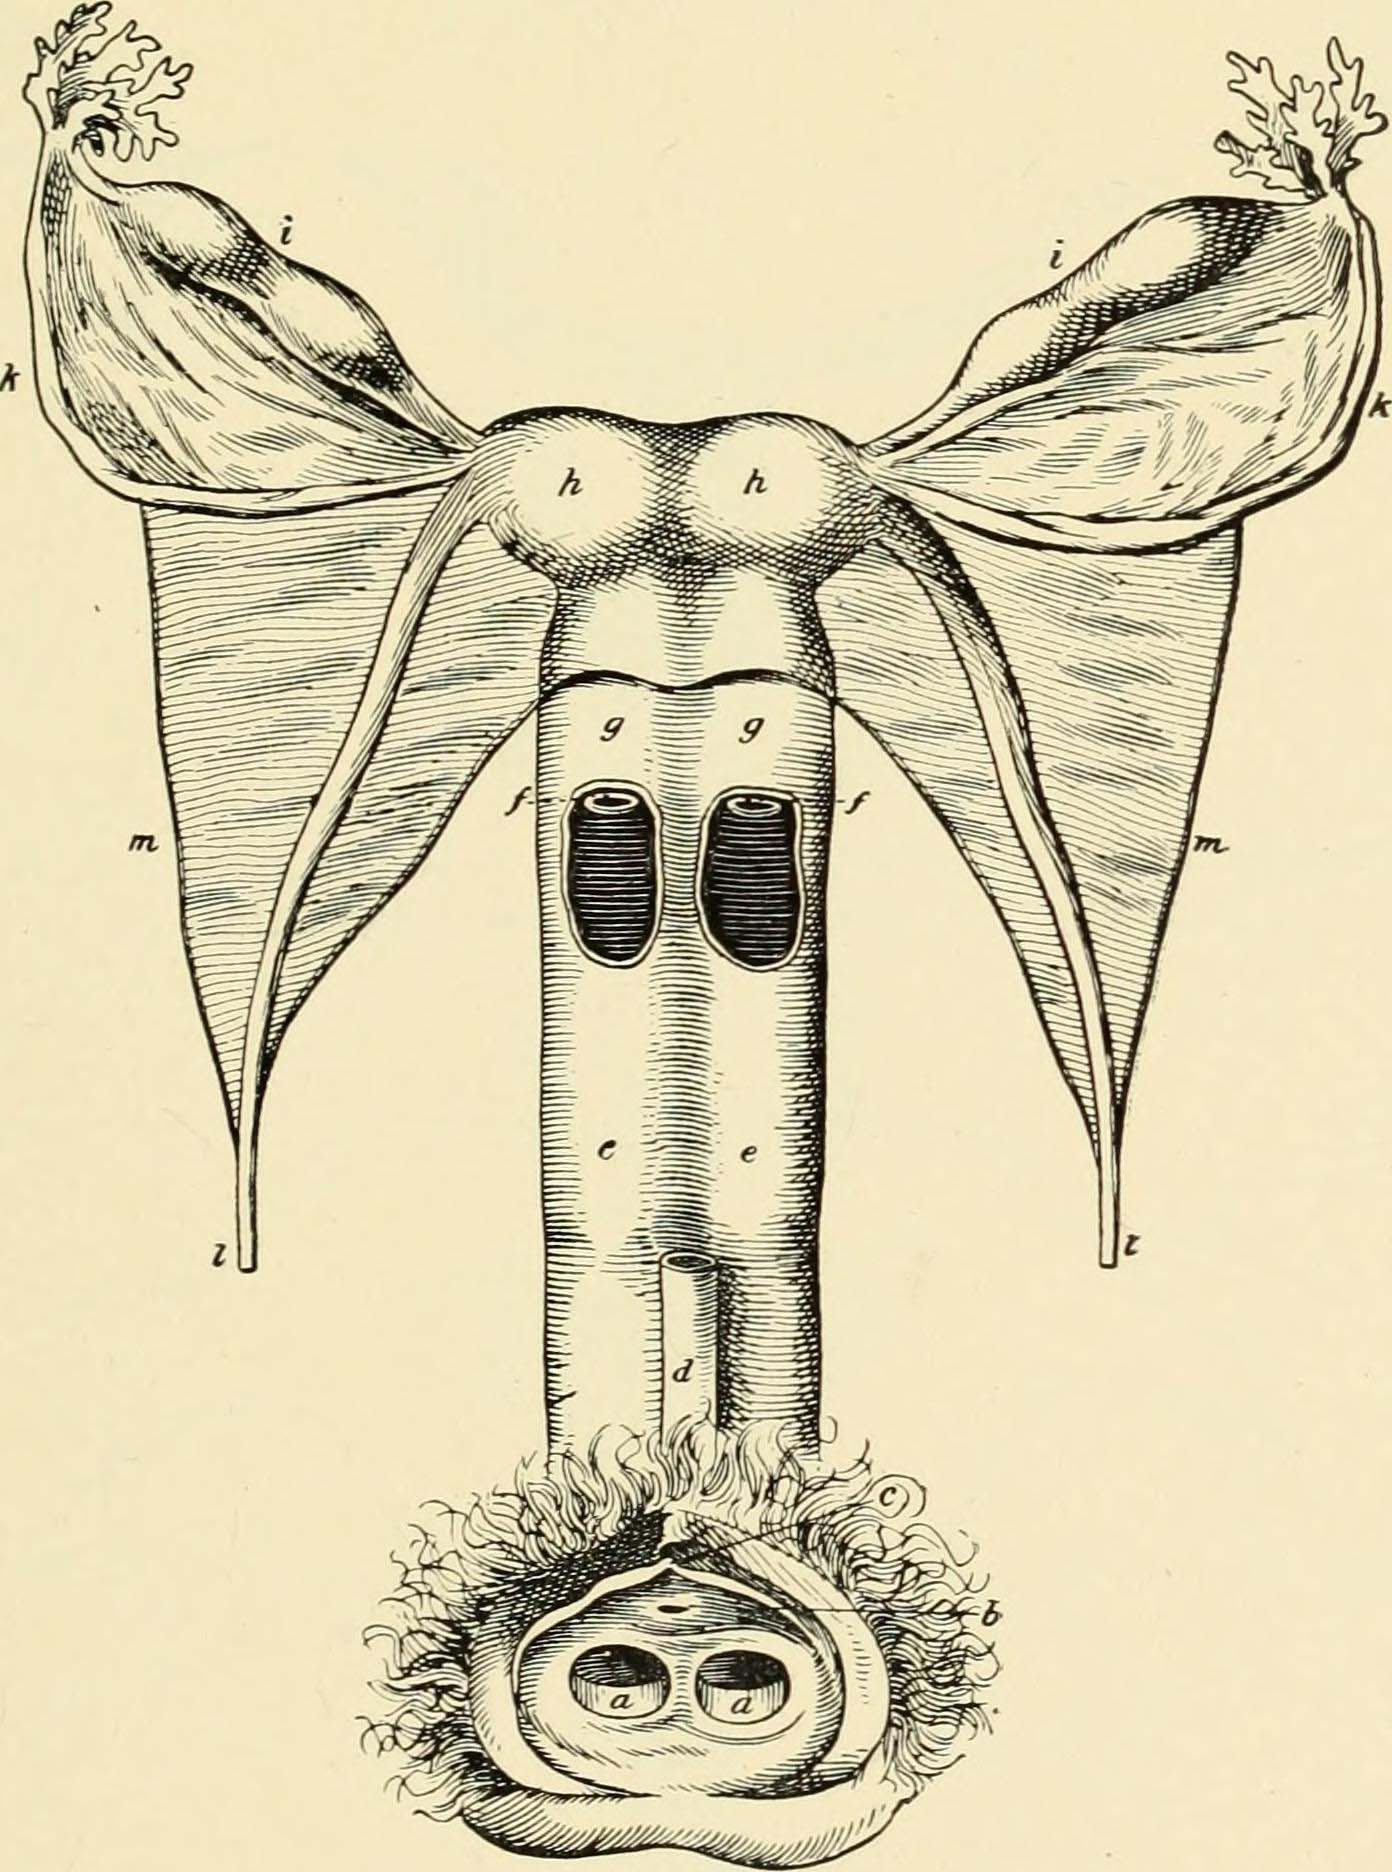 Image illustrates a Uterus Didelphys with two vaginas